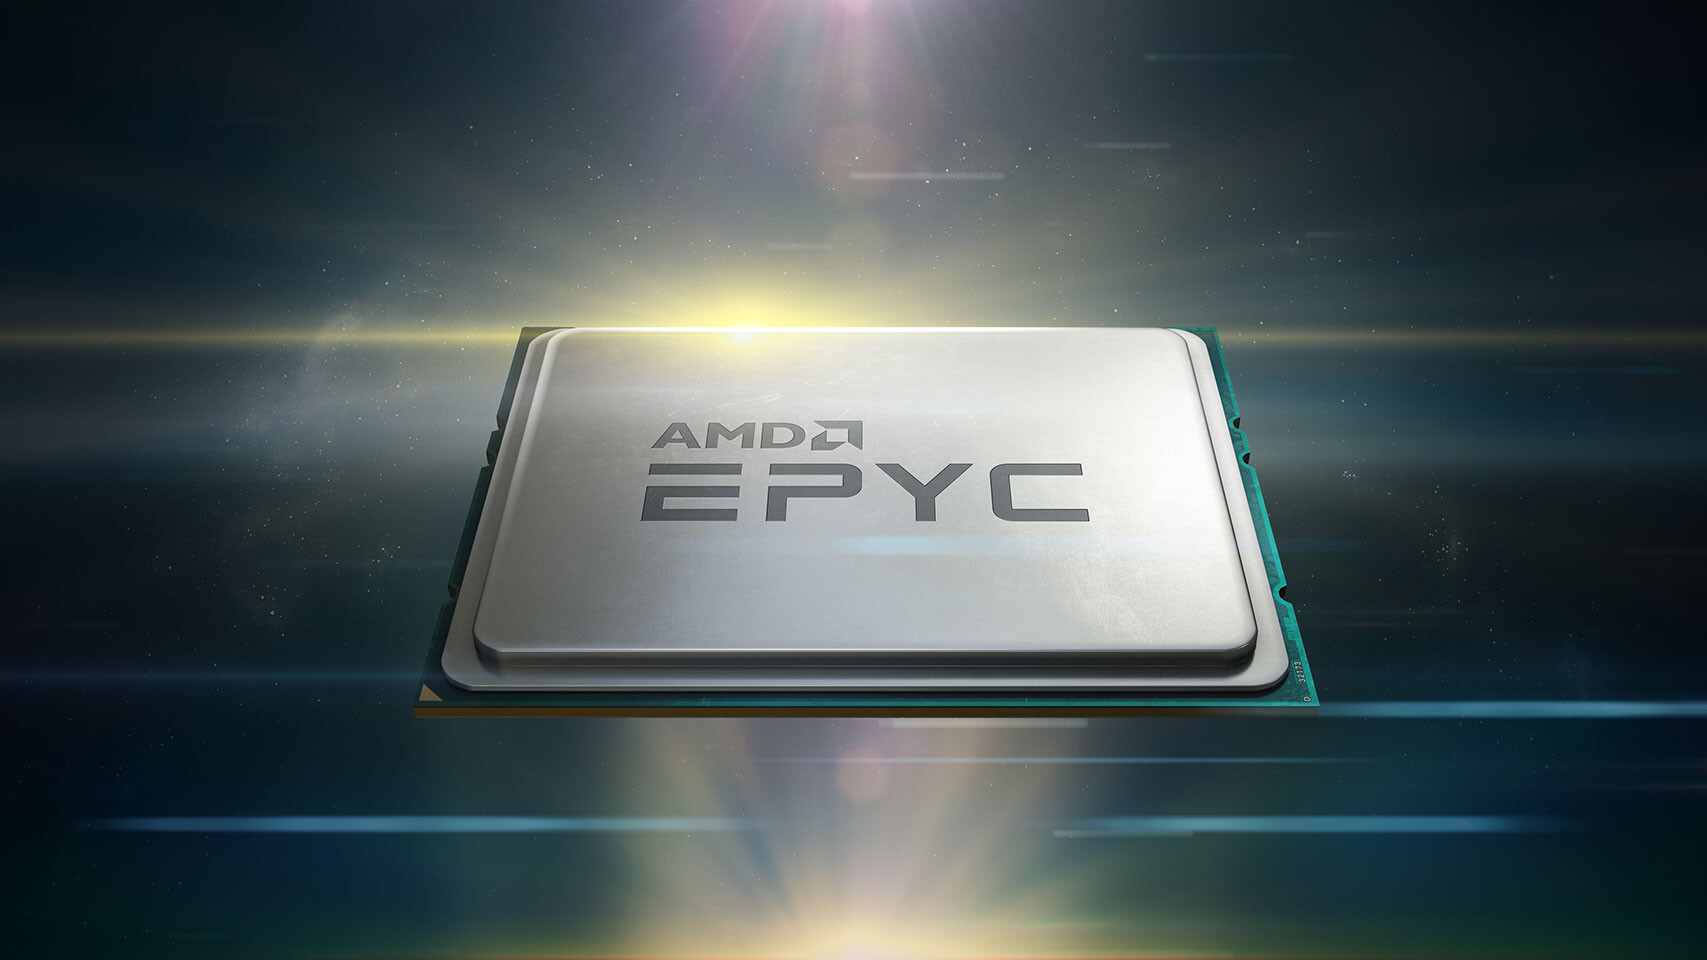 After 34 months of uptime, a bug in AMD EPYC 